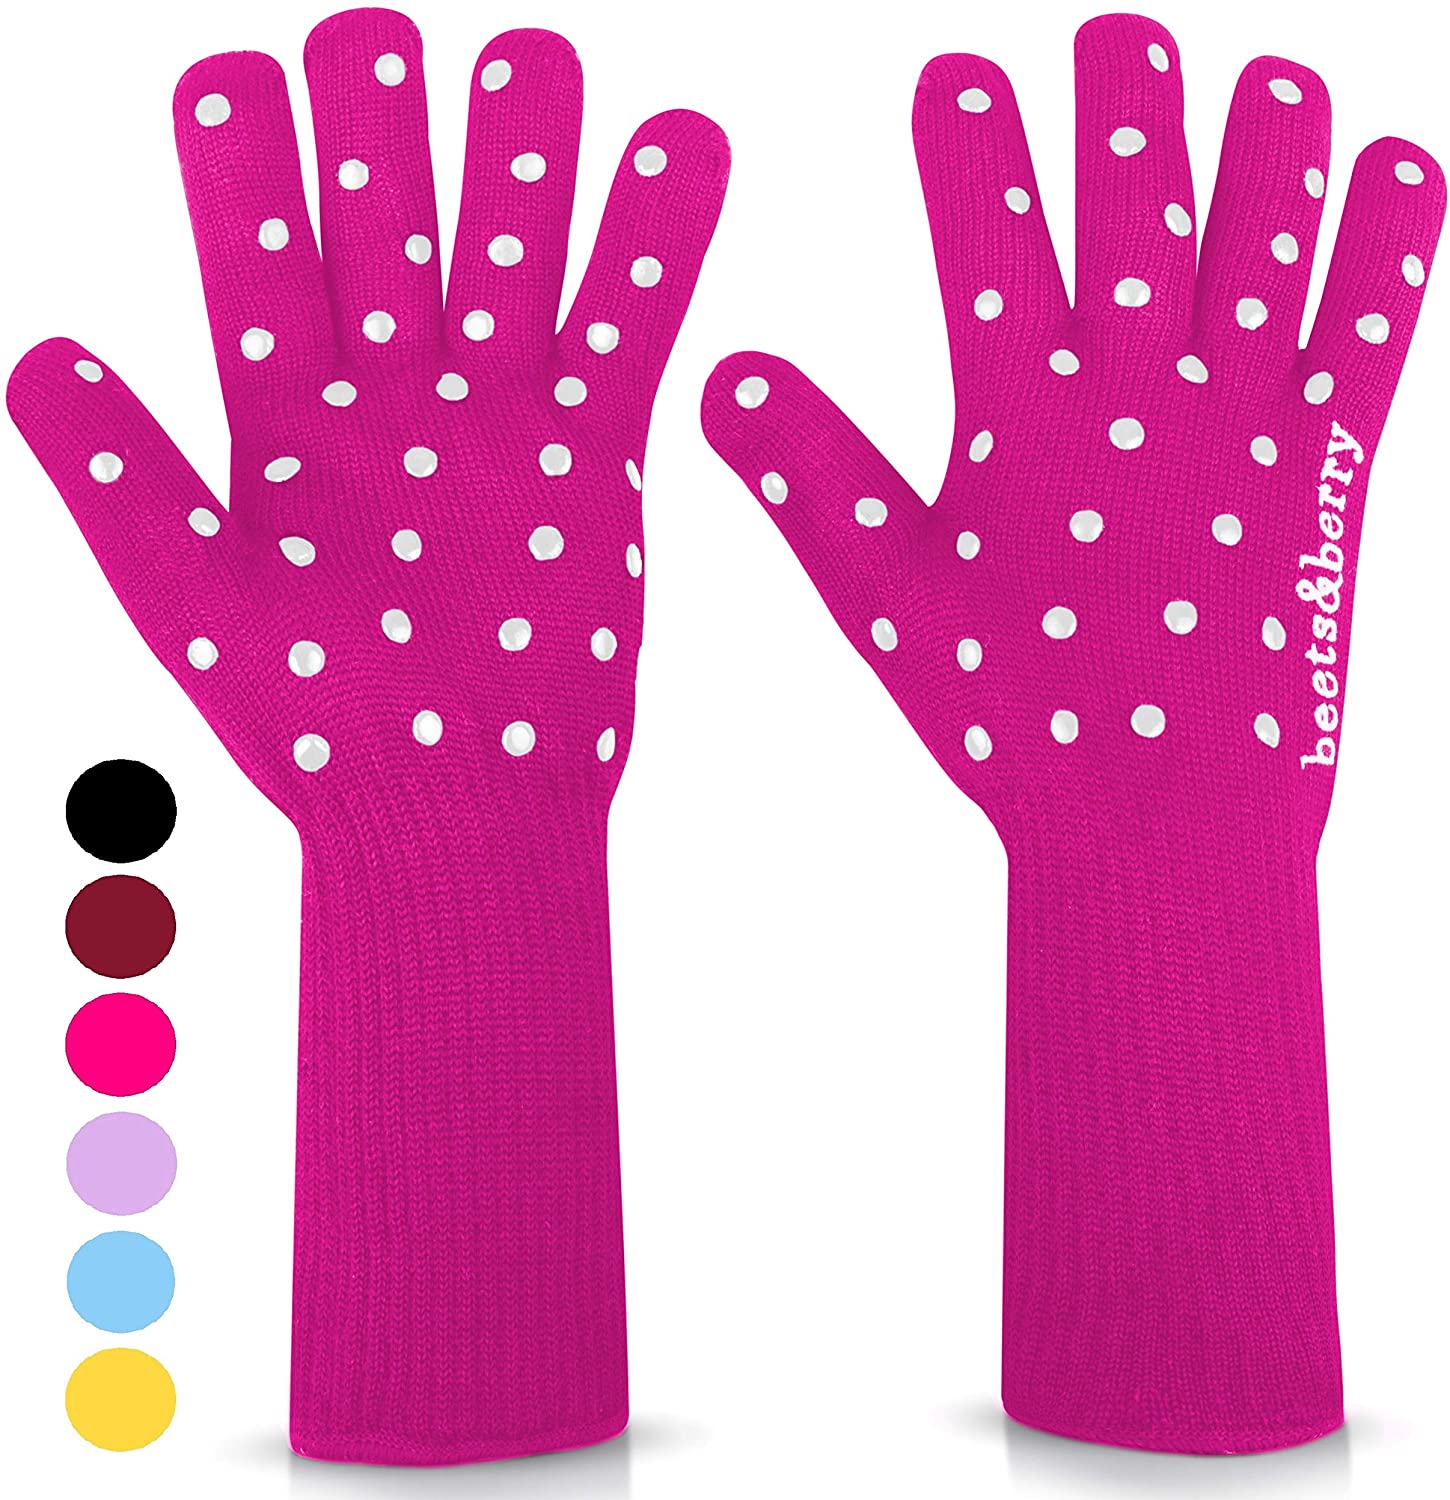 beets&berry Oven Gloves Oven Mitts Heat Resistant to 500°| 1 Pair Heat Resistant Gloves with Extra Long Sleeves to Protect Forearms | Non-Slip Grip Spots (Fuchsia Pink)